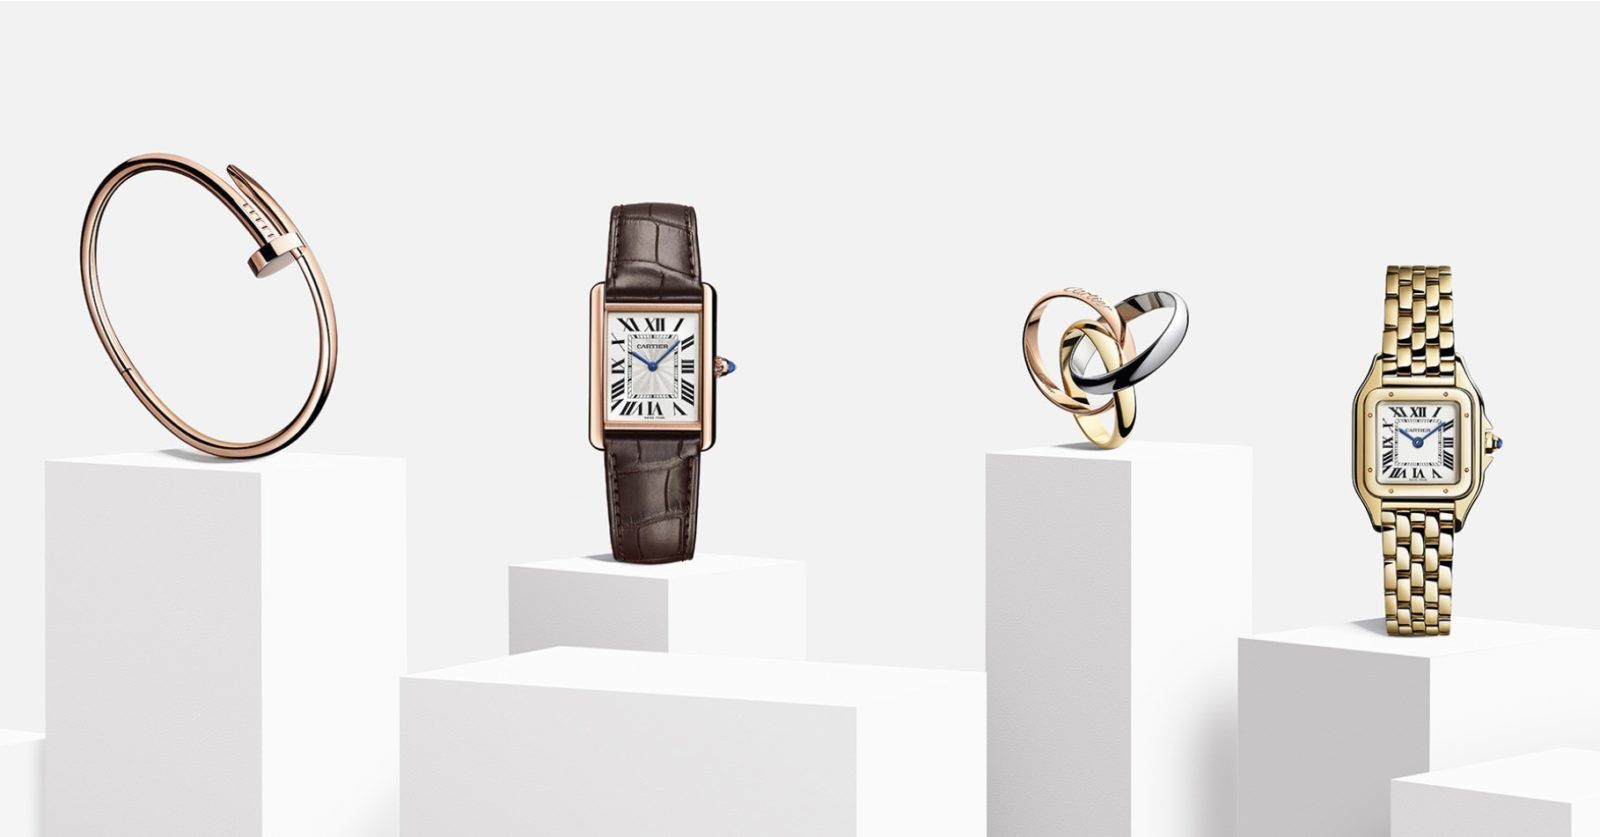 This is why Cartier’s timeless and romantic creations remain an icon today